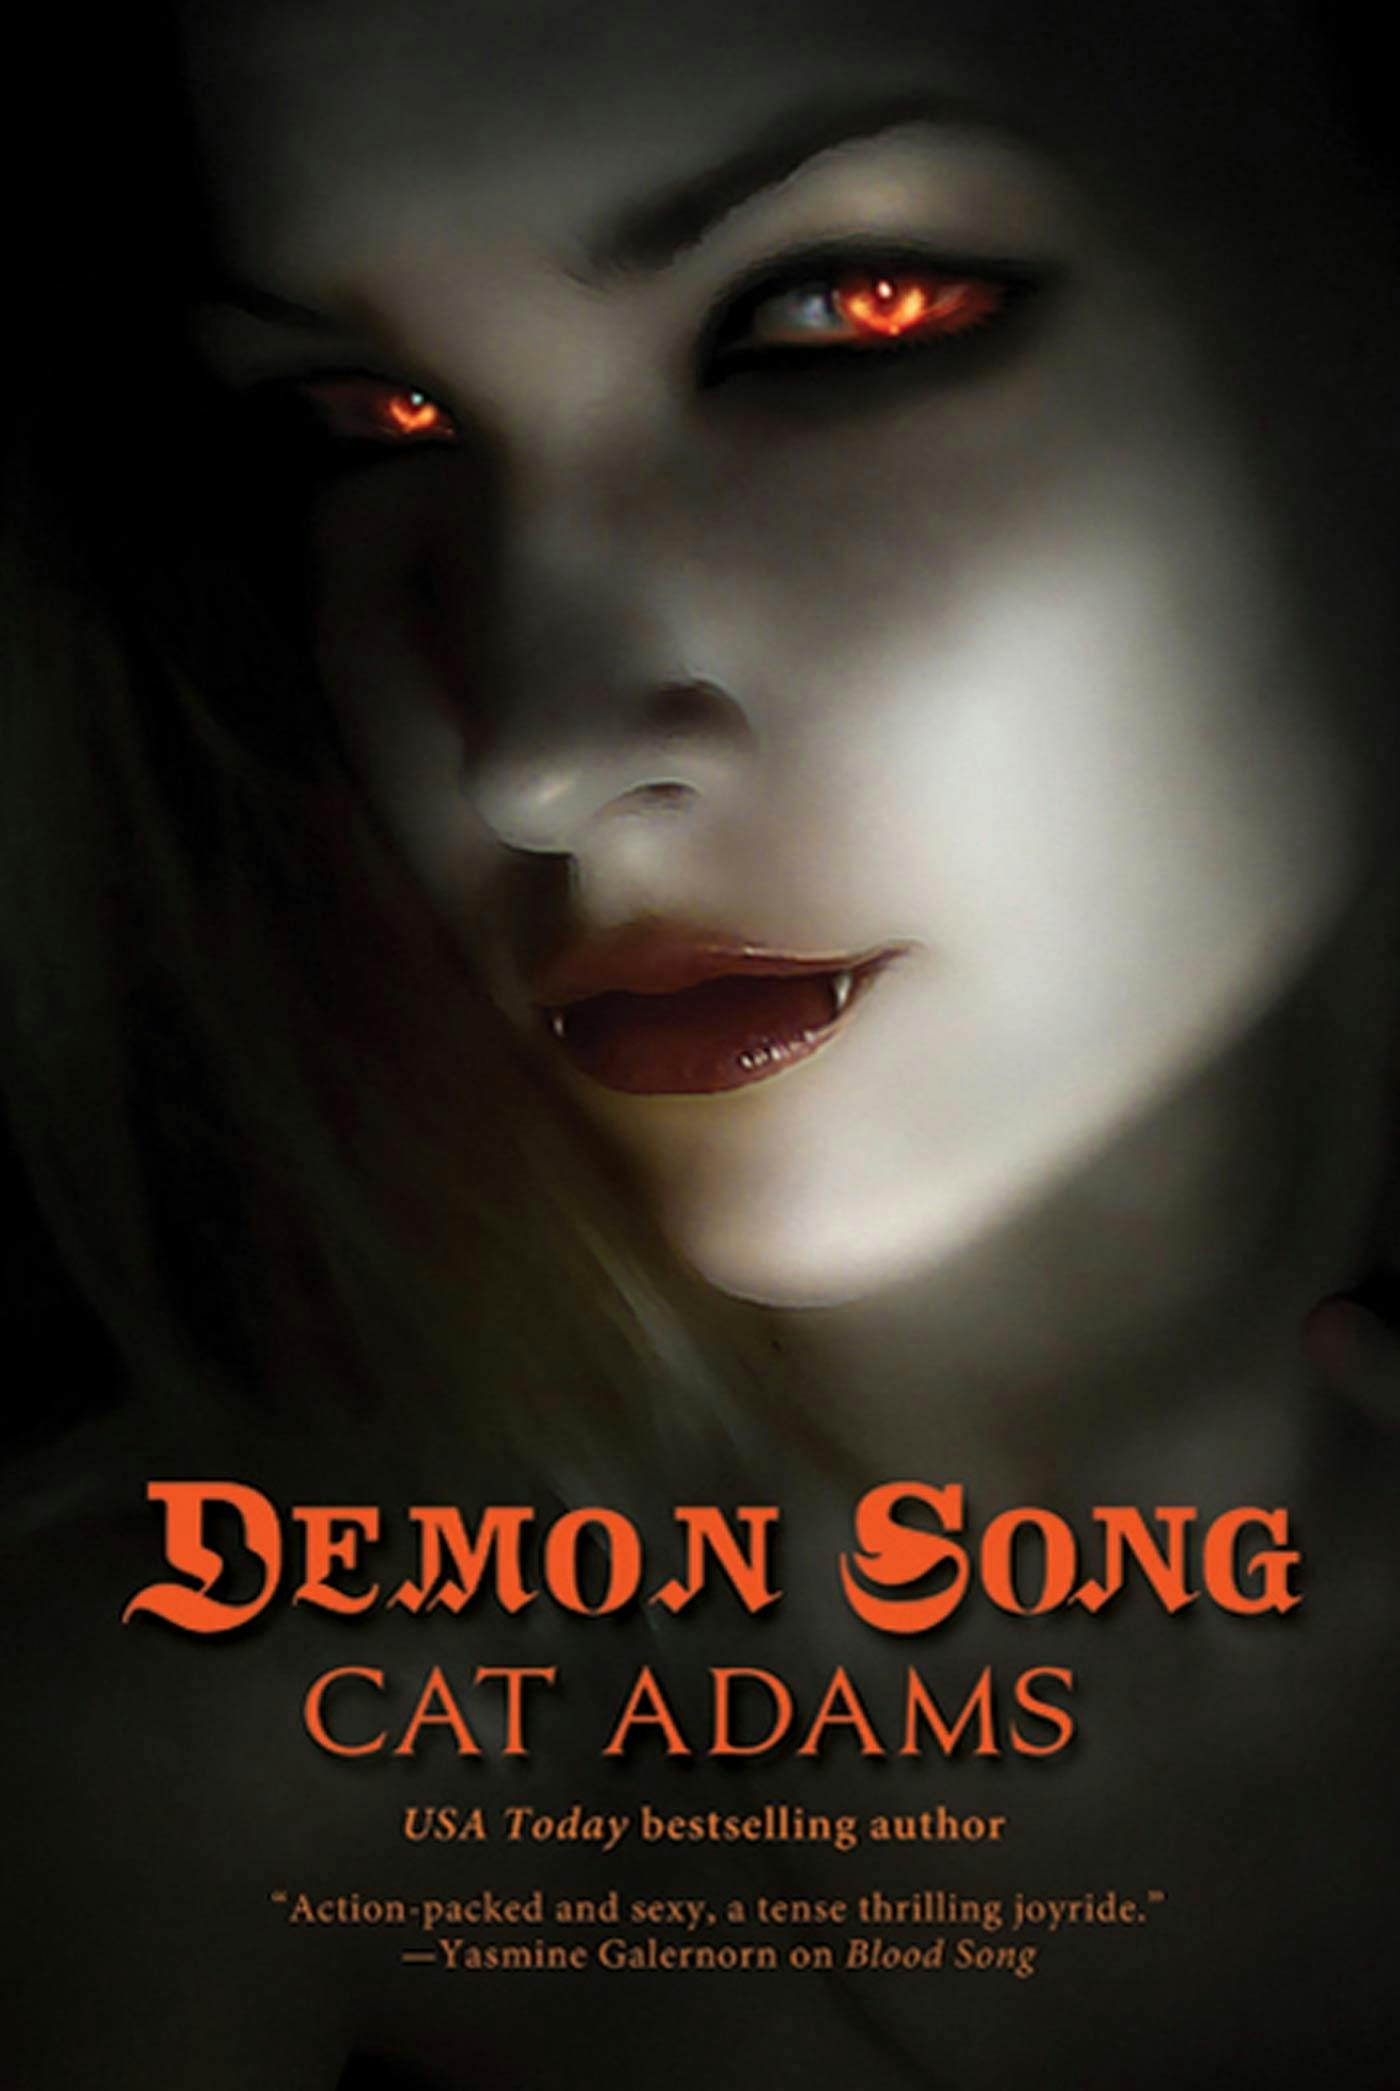 Cover for the book titled as: Demon Song